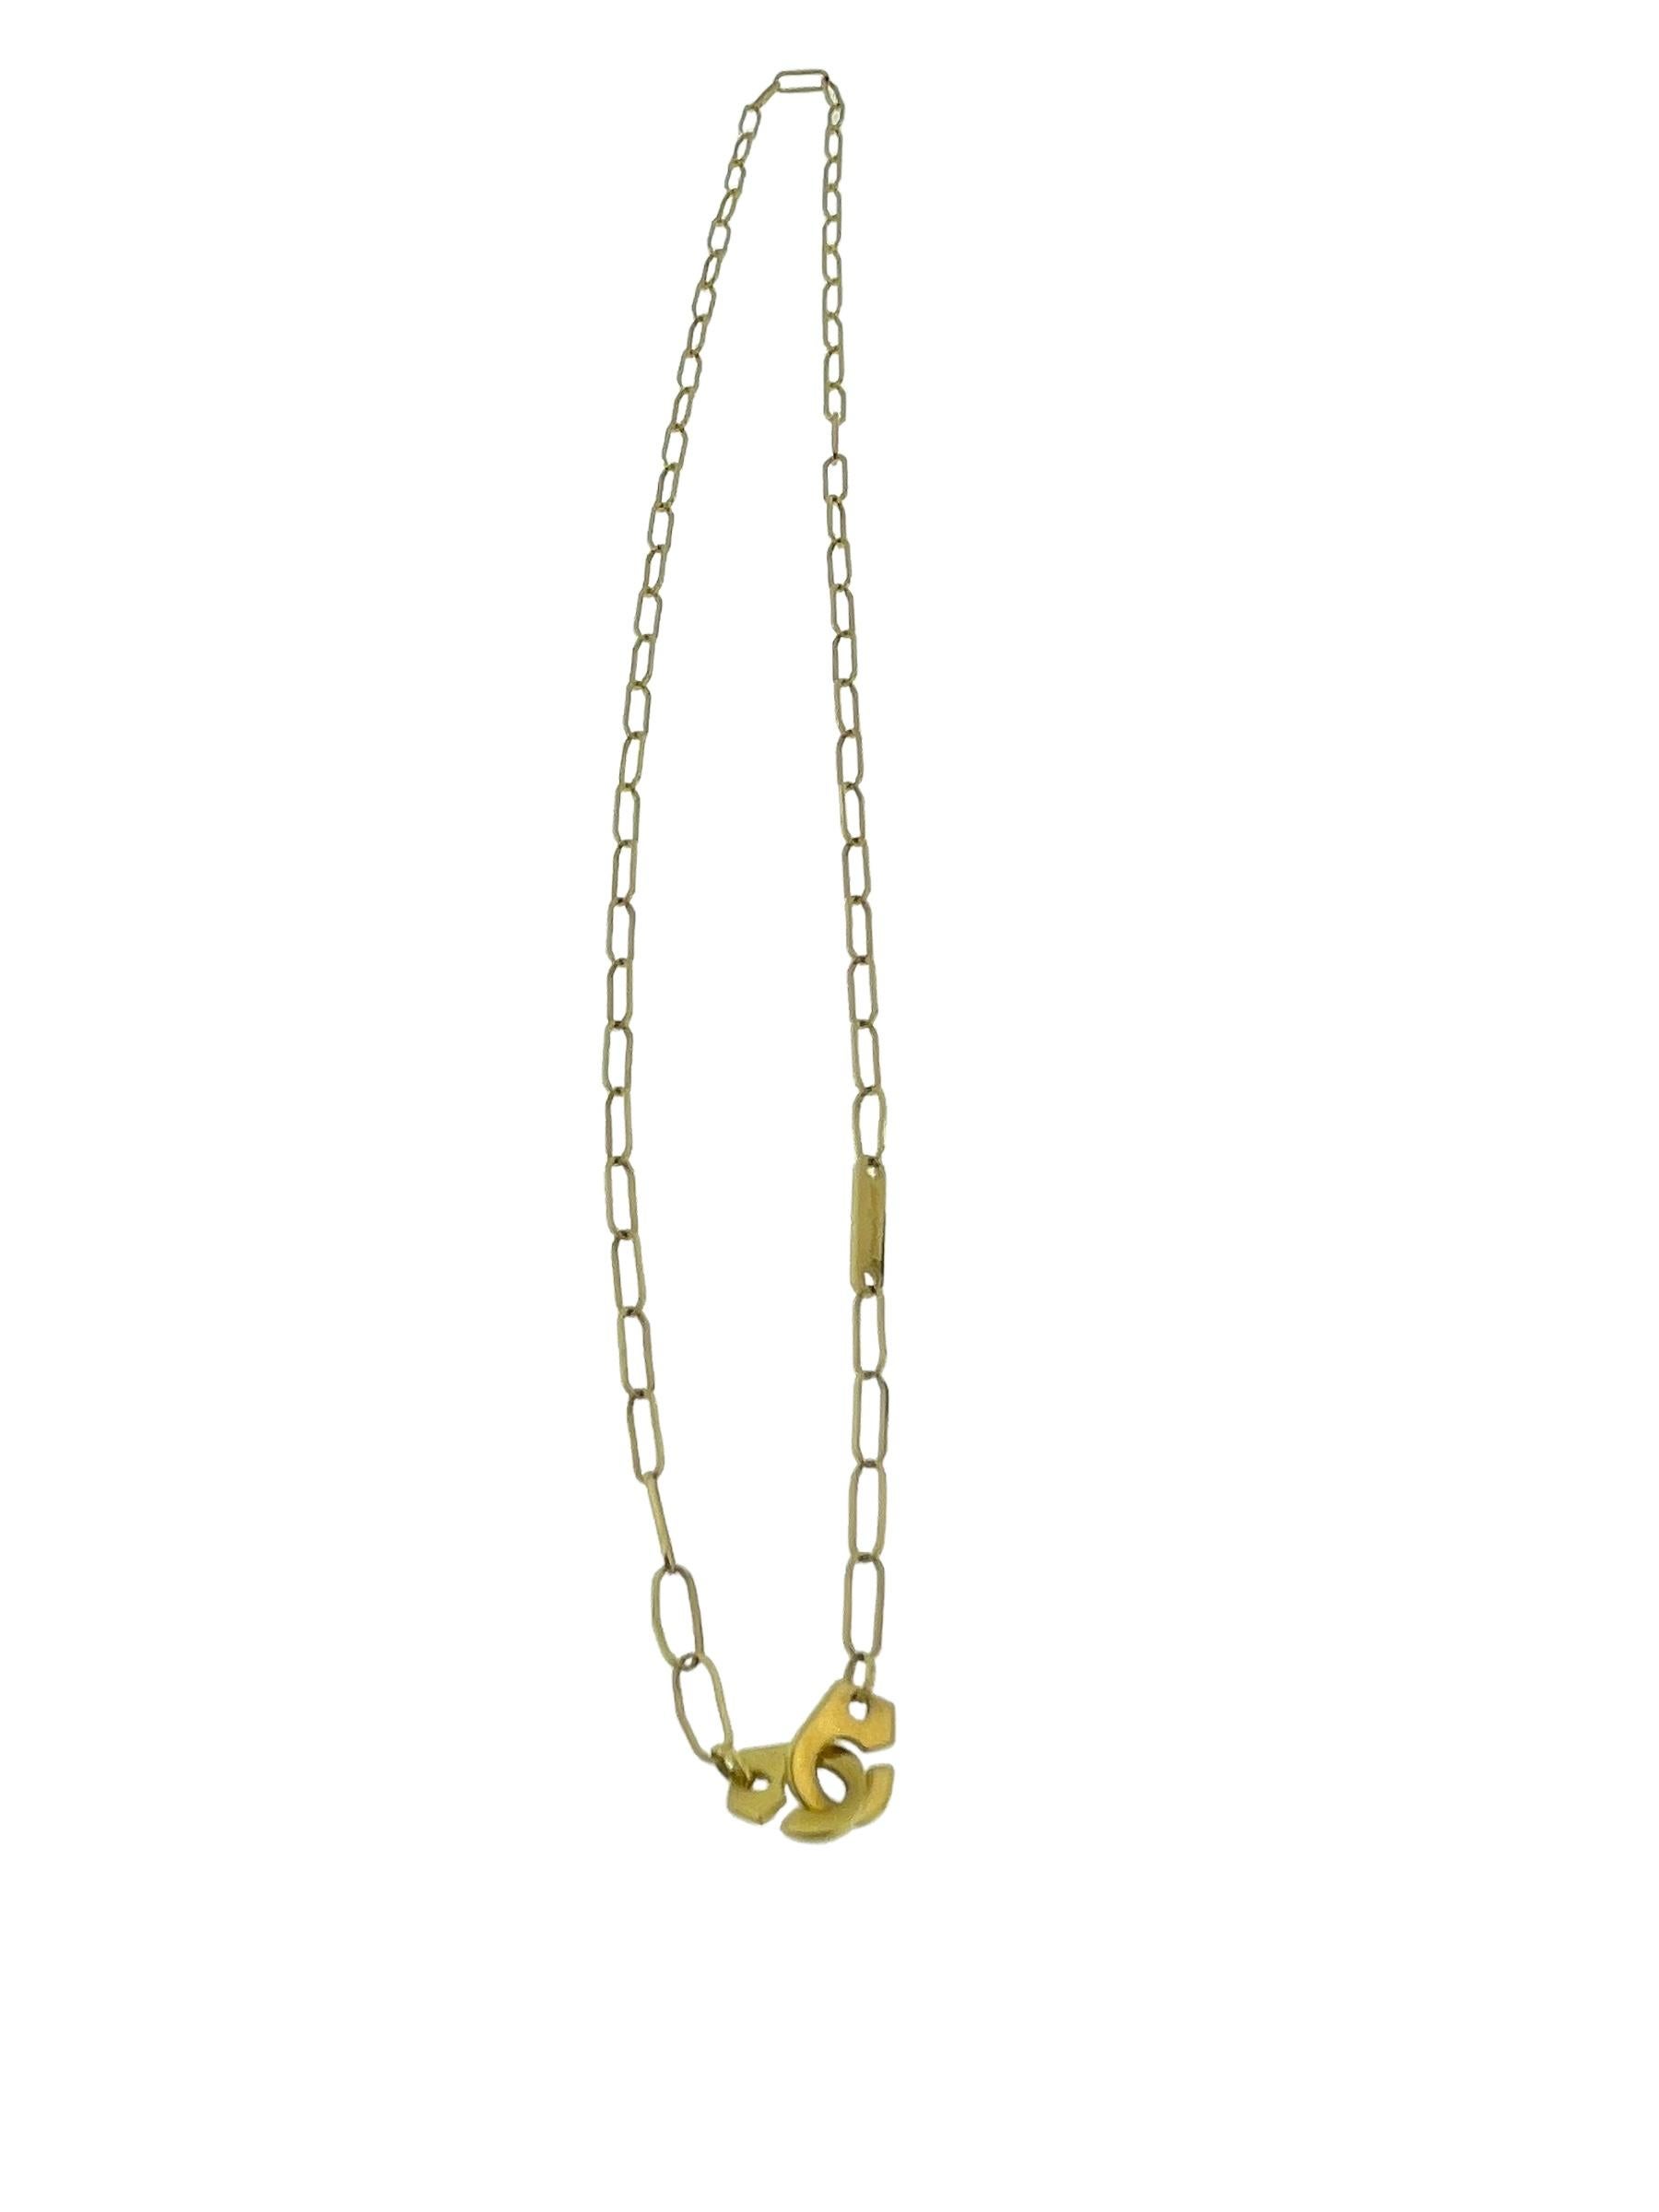 Italian Yellow Gold Link Necklace by Chimento In Good Condition For Sale In Esch sur Alzette, Esch-sur-Alzette